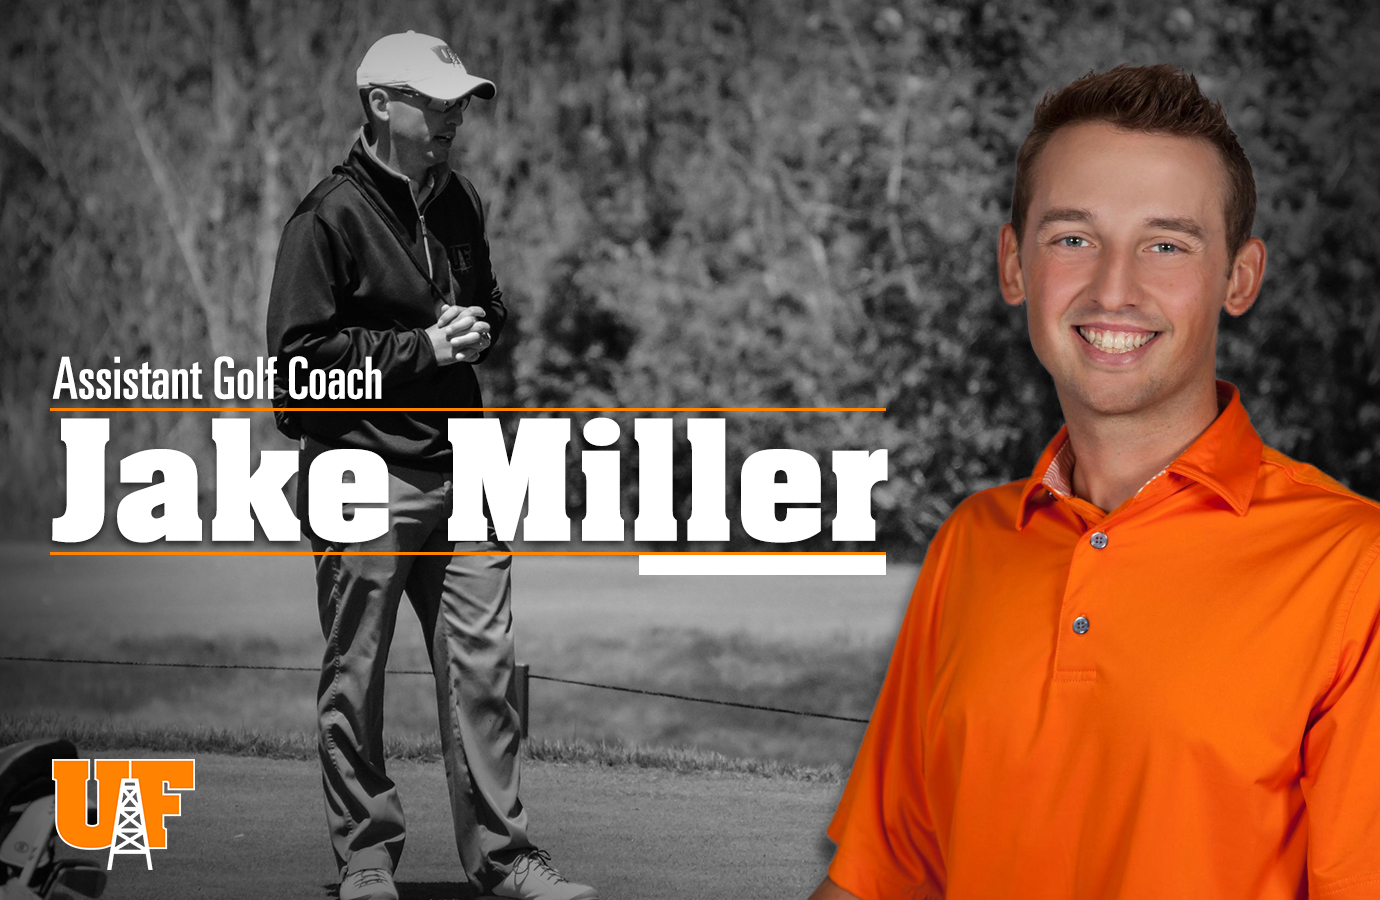 Jake Miller Hired as Assistant Golf Coach